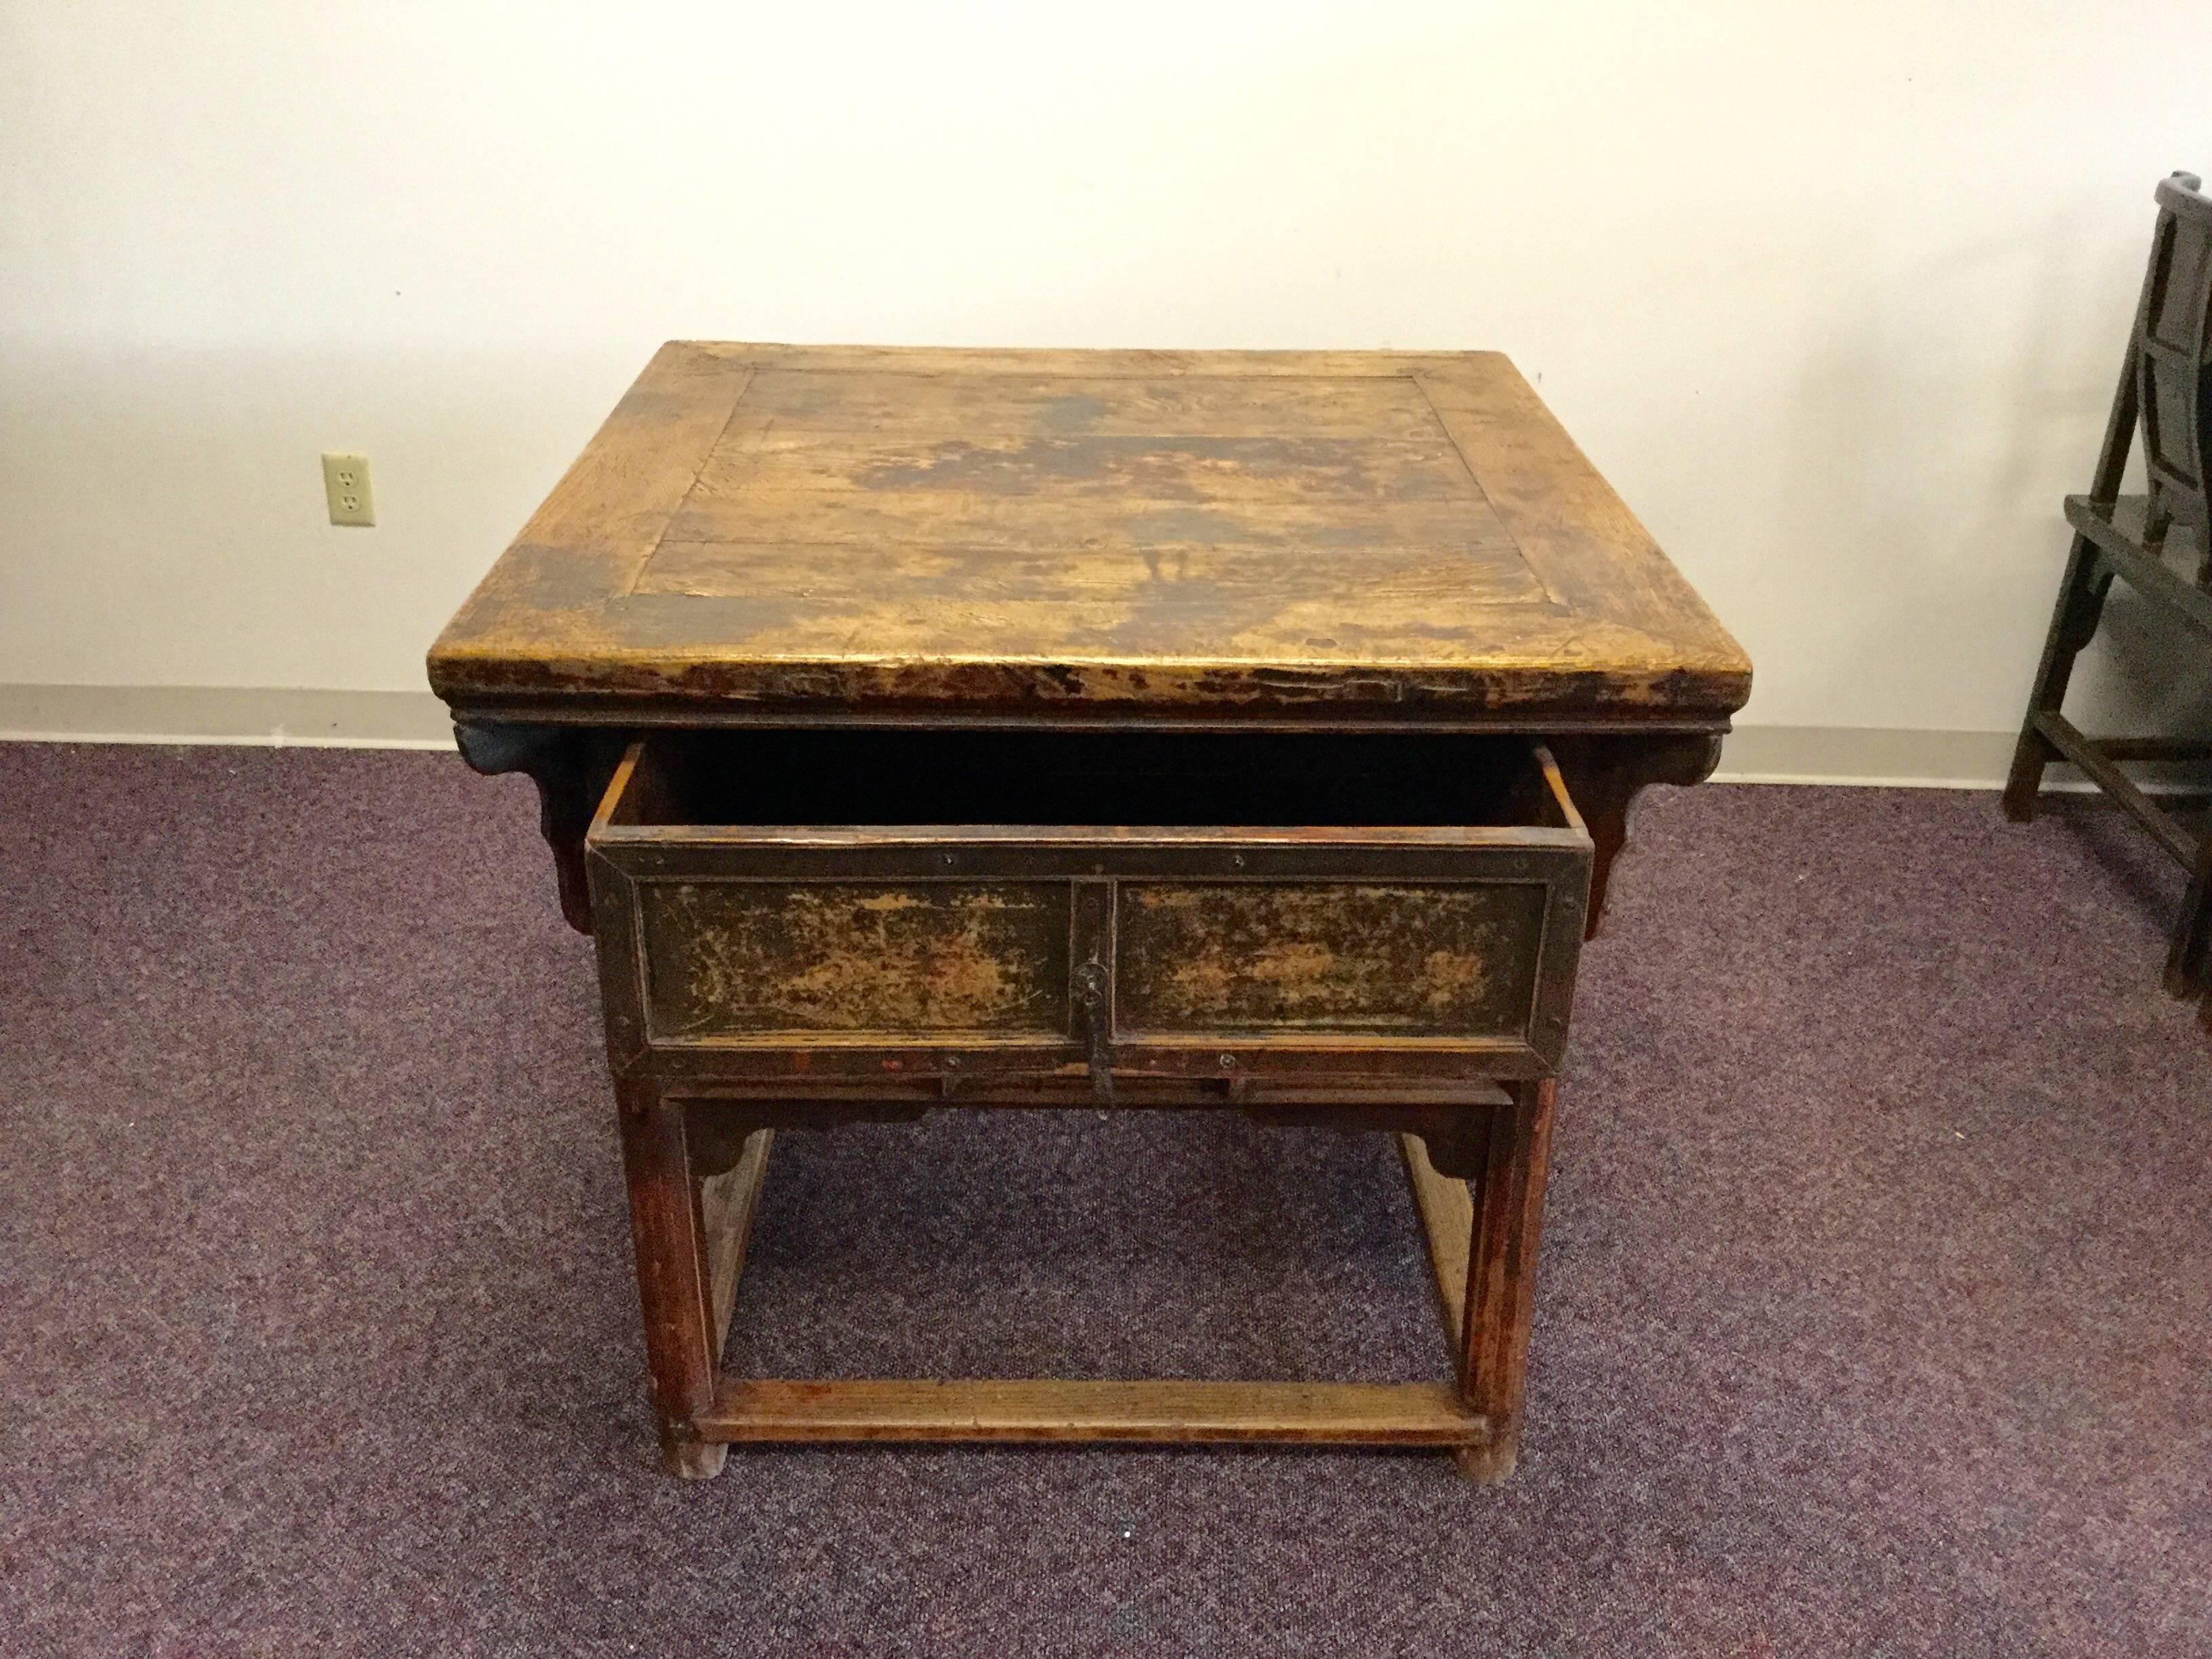 This wonderful piece was handcrafted from walnut then painted with a charming lotus blossom motif.
Over 130 years old from Gansu Province where it originally served as a kitchen island, it has acquired a rich patina and the character of the